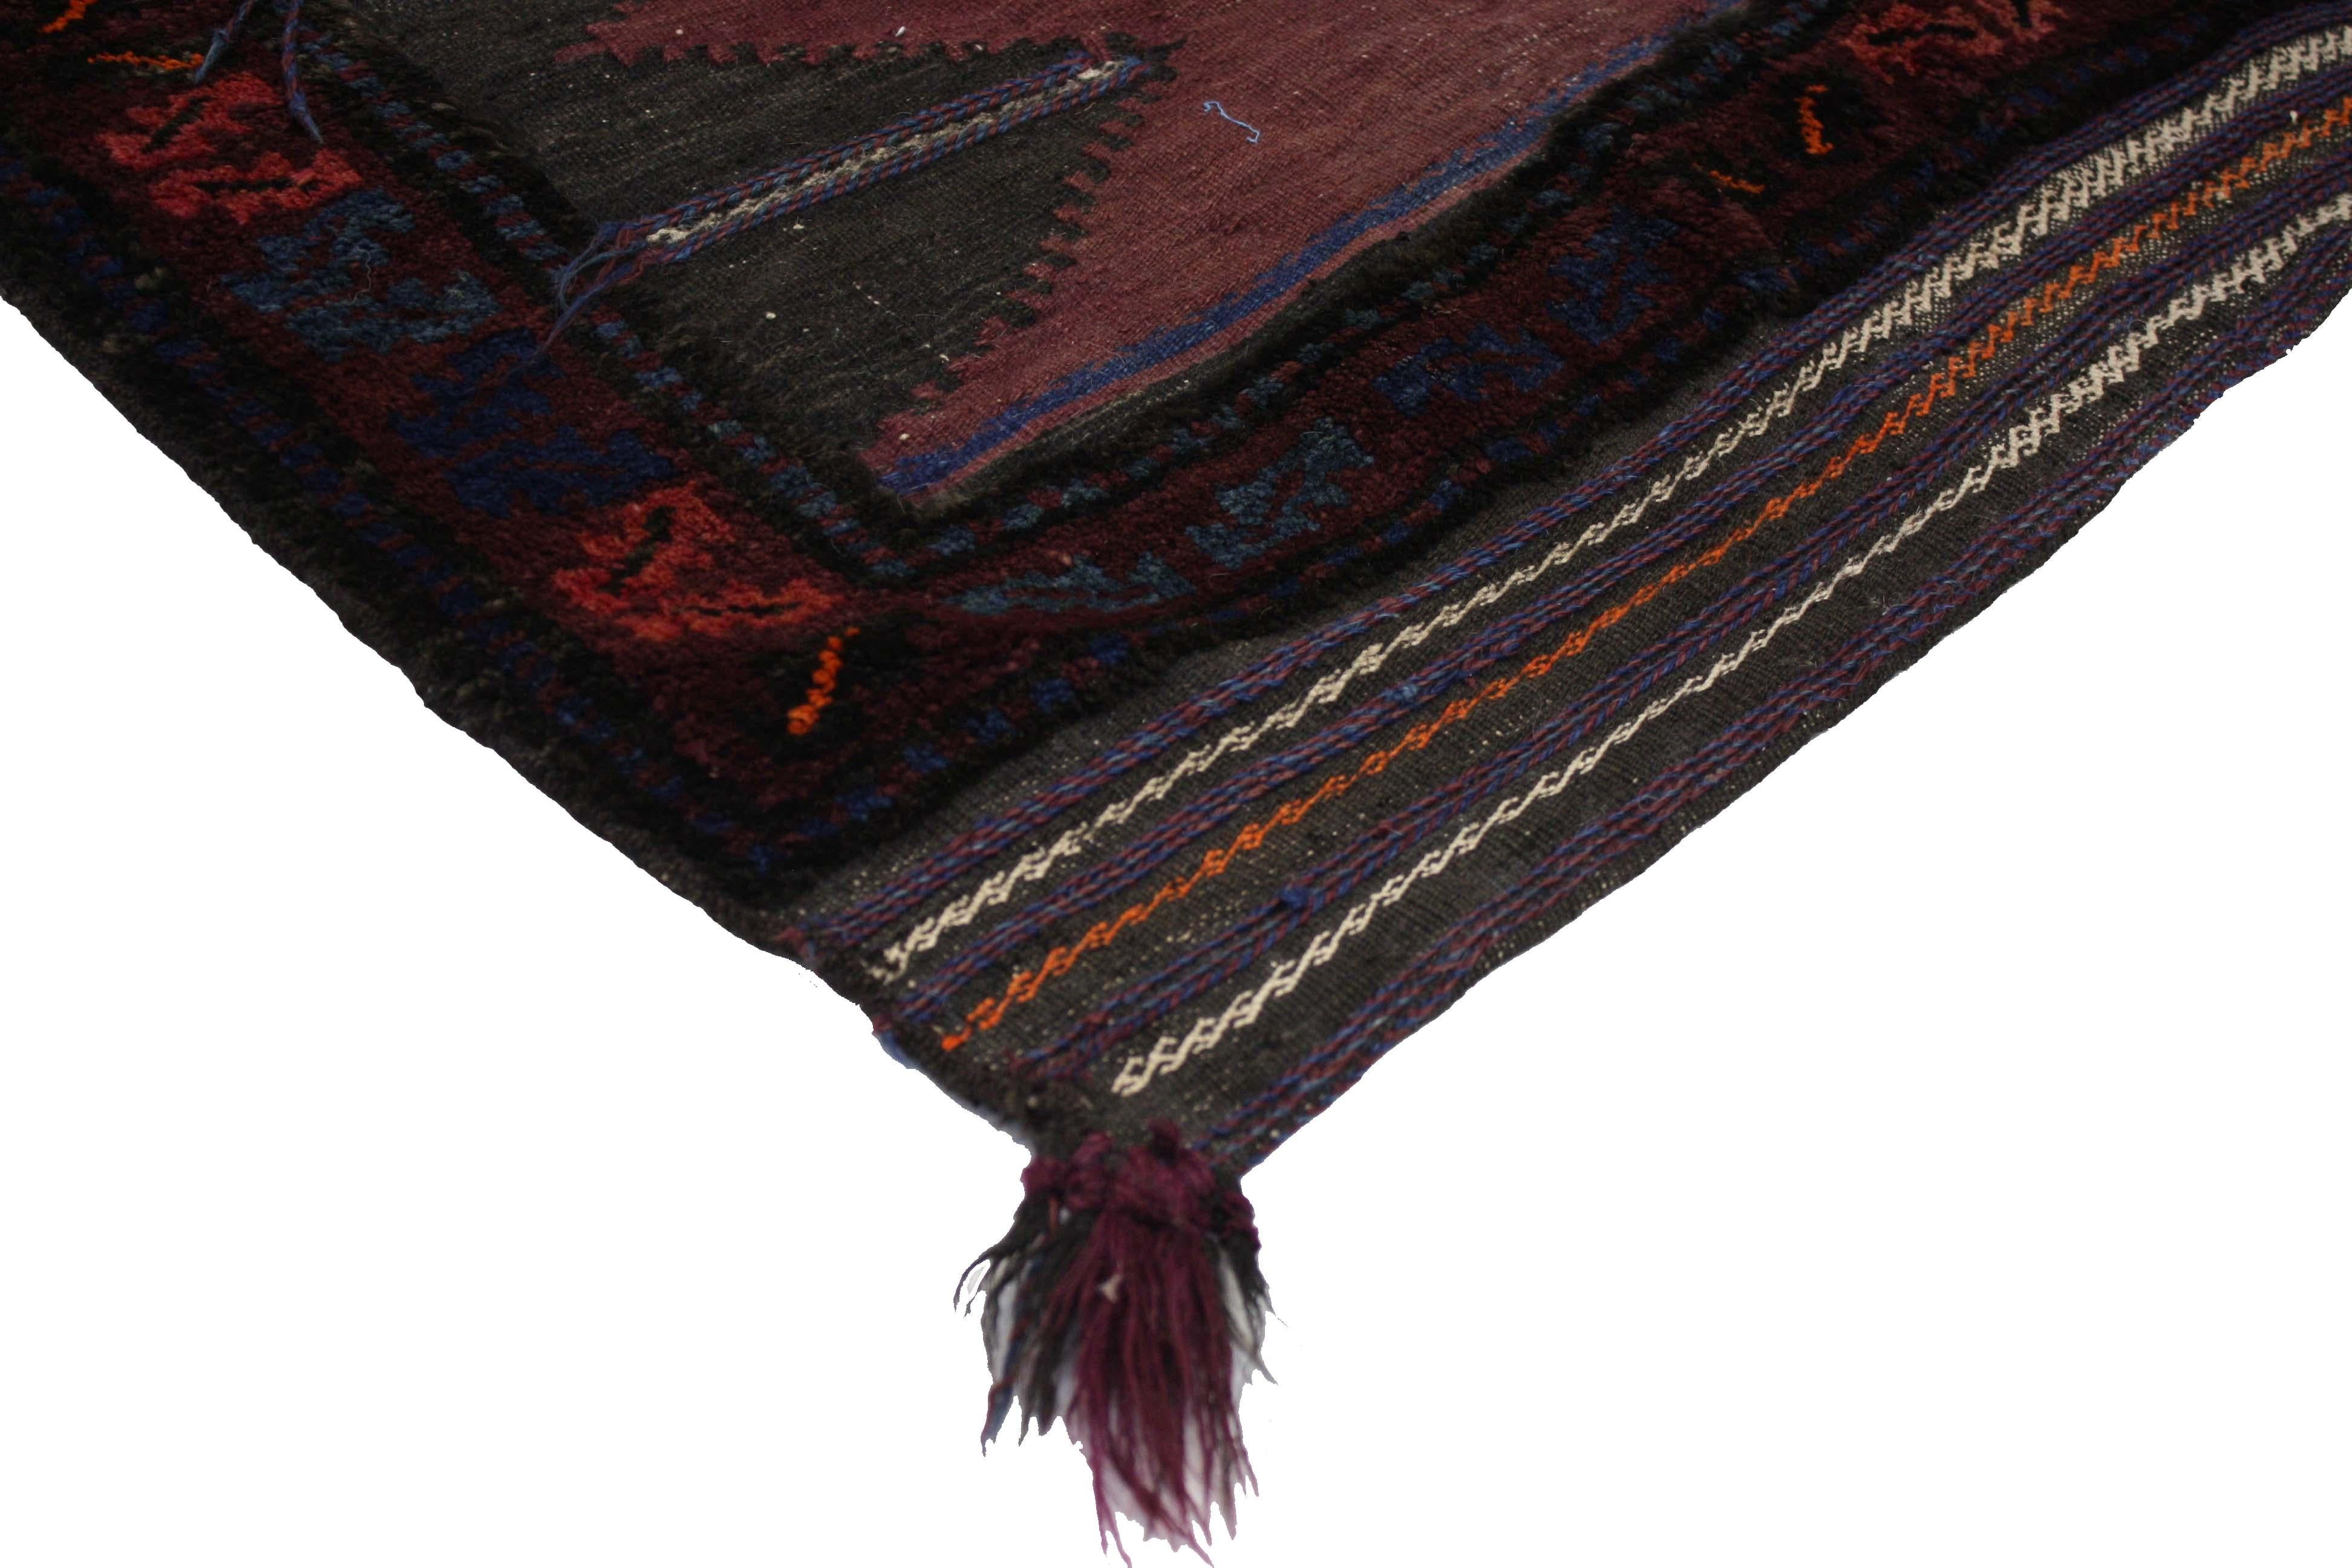 76627, antique Baluch Bagface, Saddlebag, Afghan rug, Textile Art or Tribal Accent rug, nomadic wall hanging. This antique Afghan Baluch bagface features an open abrashed field with serrated ziggurat mounds reaching towards the open center. These